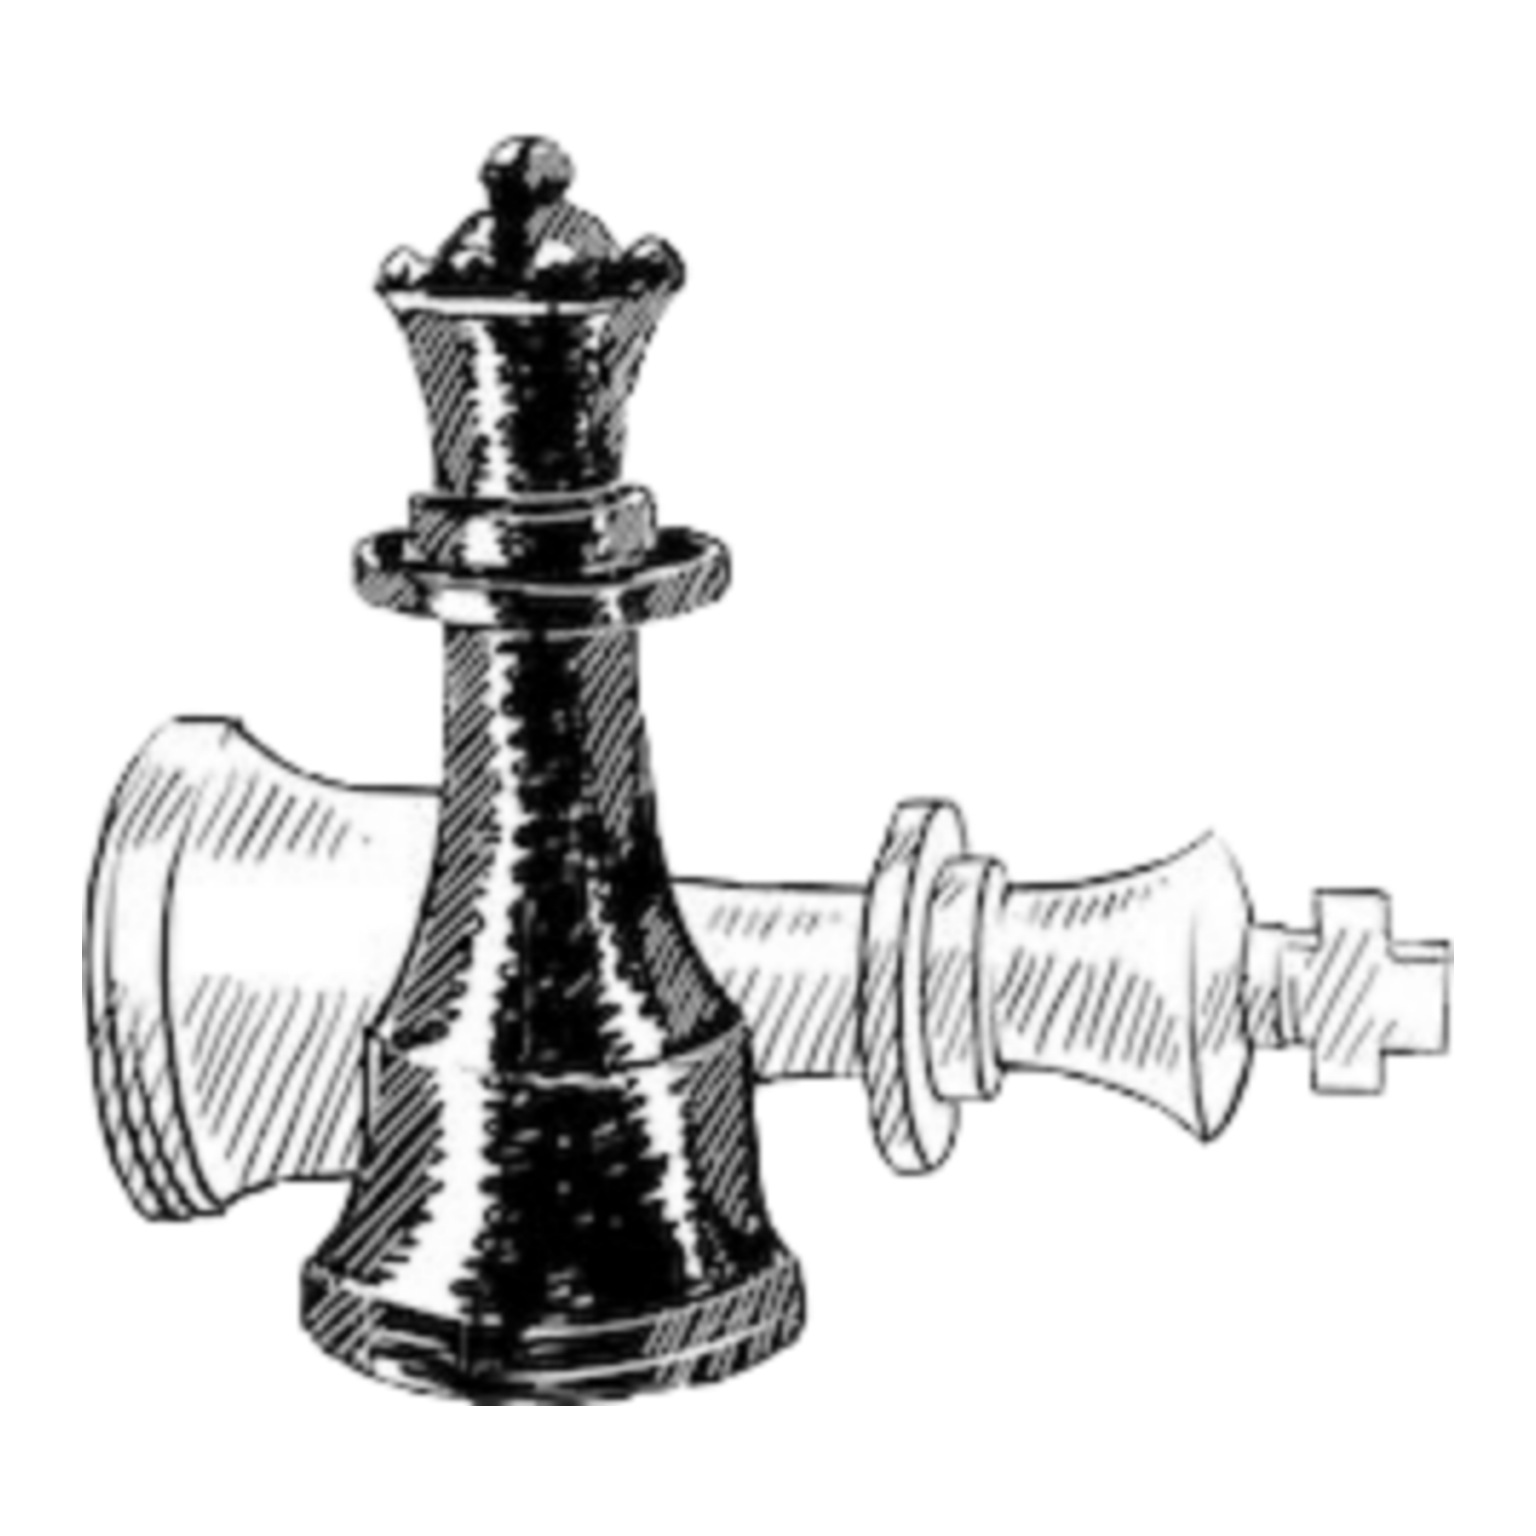 T-shirt Chess Designs preview image.